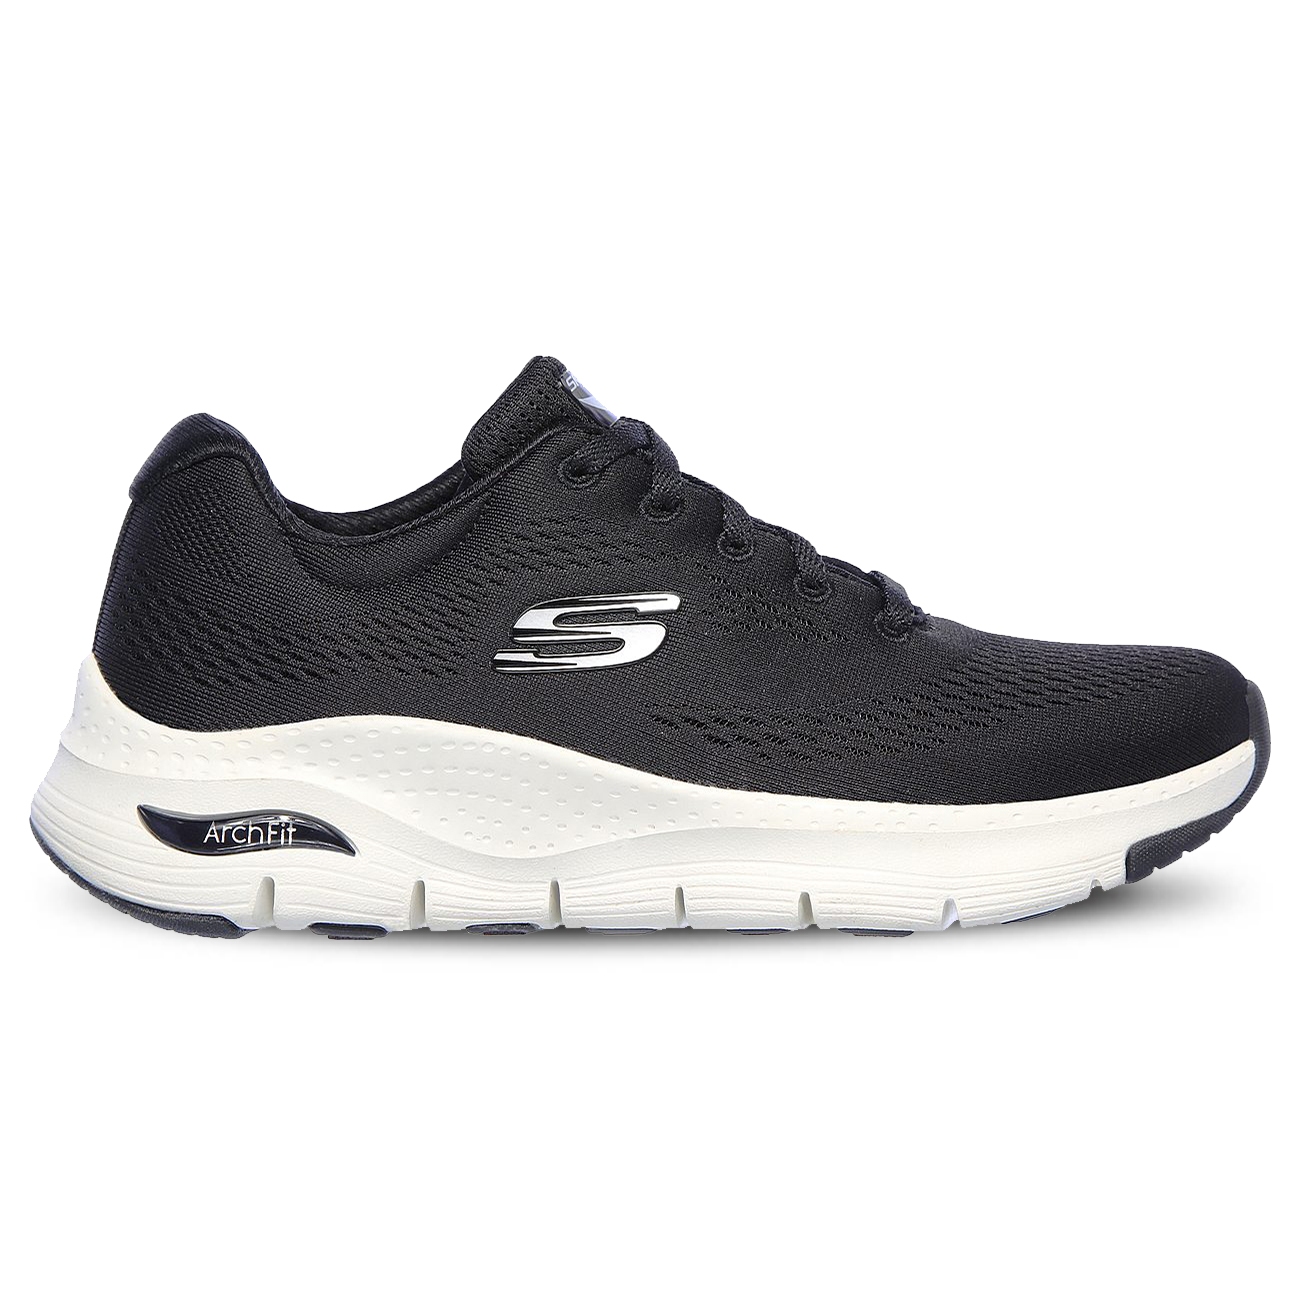 Skechers Womens Arch Fit